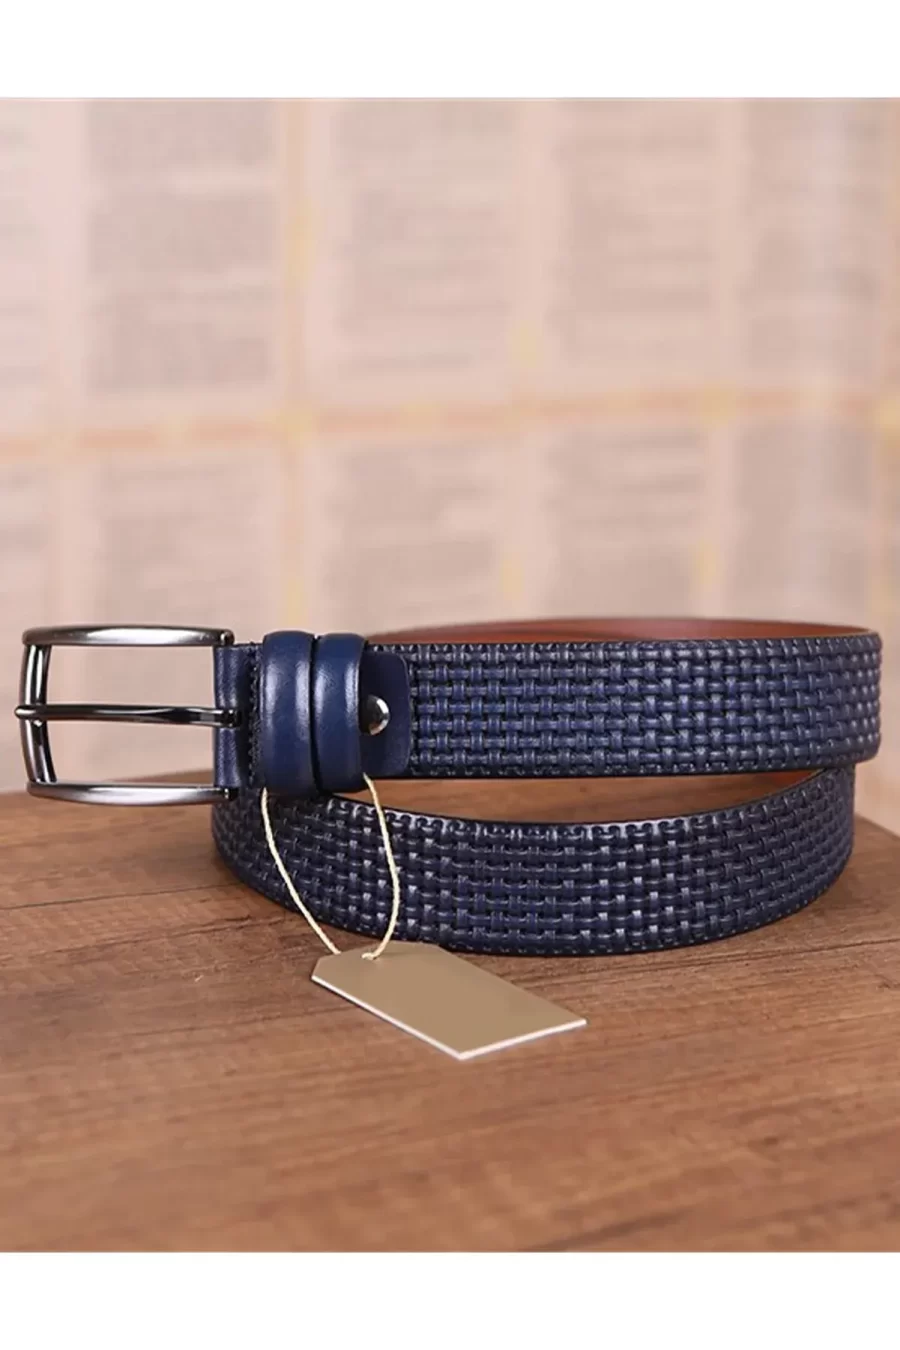 Blue Gents Leather Belt For Trousers Luxury KD 011 4 2